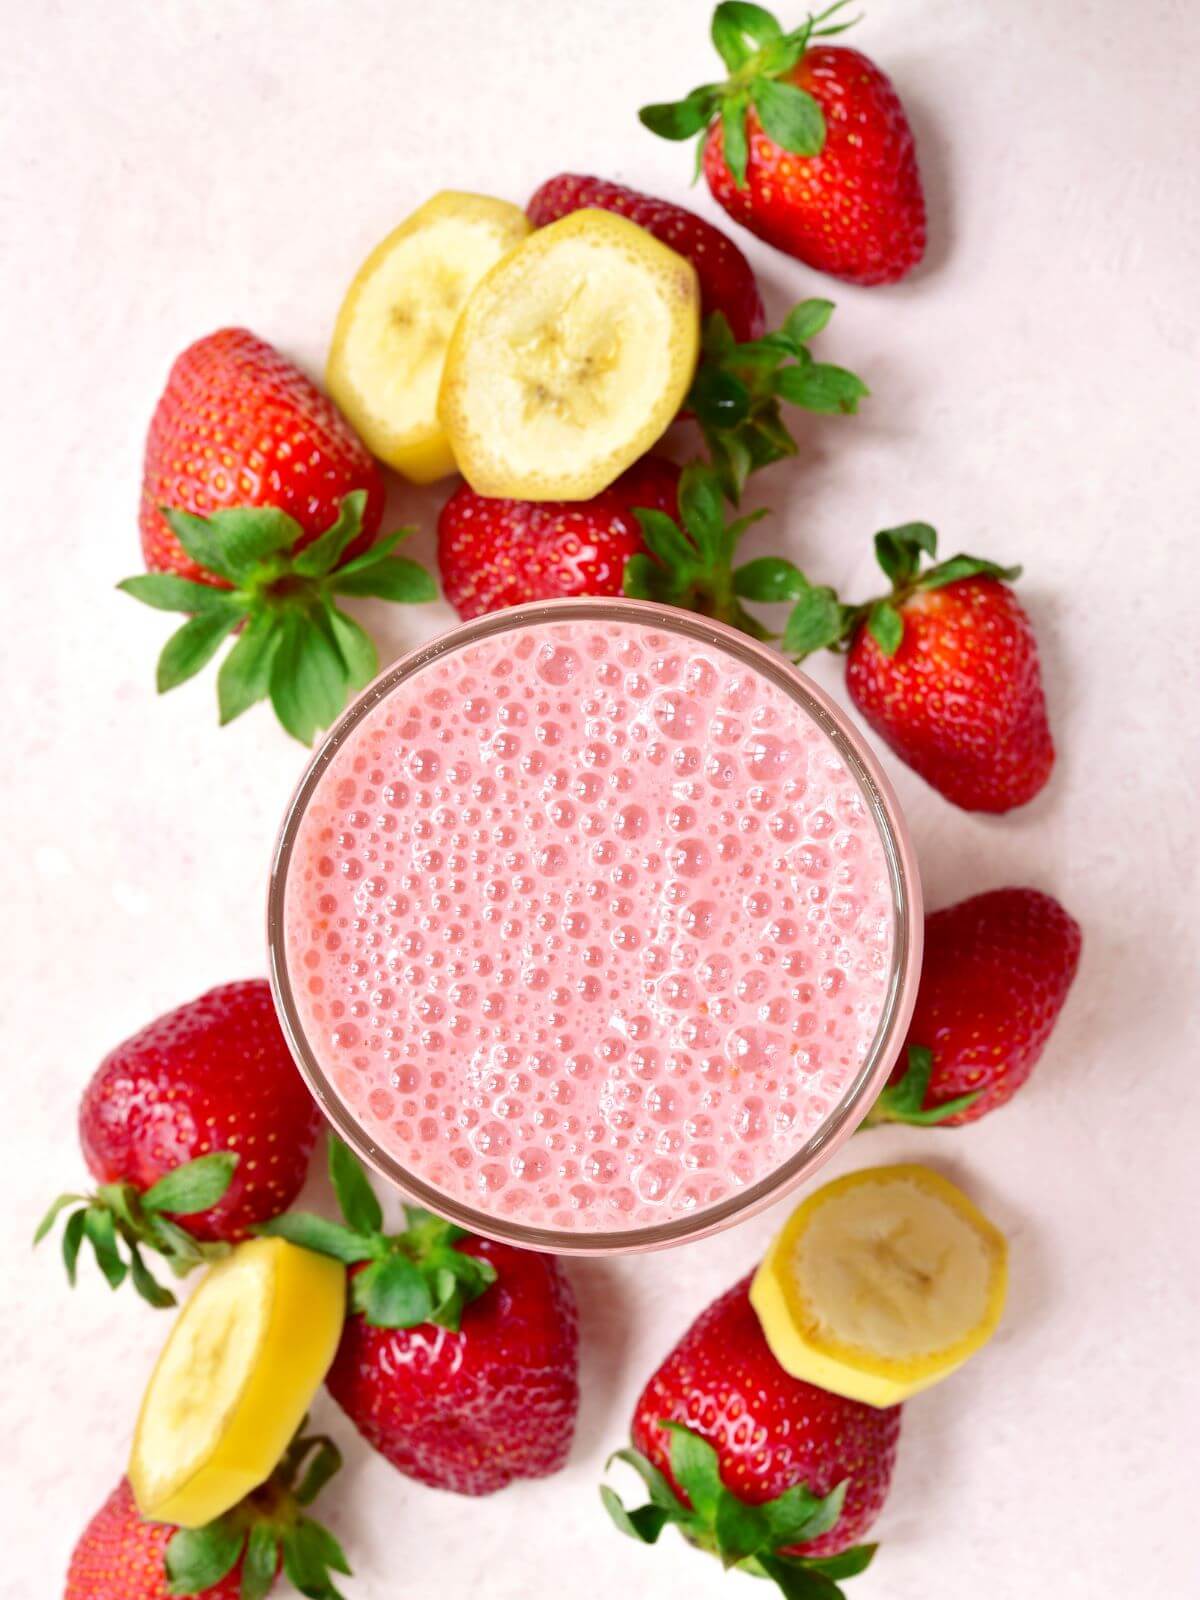 Pink smoothie with strawberries and bananas on the side. 